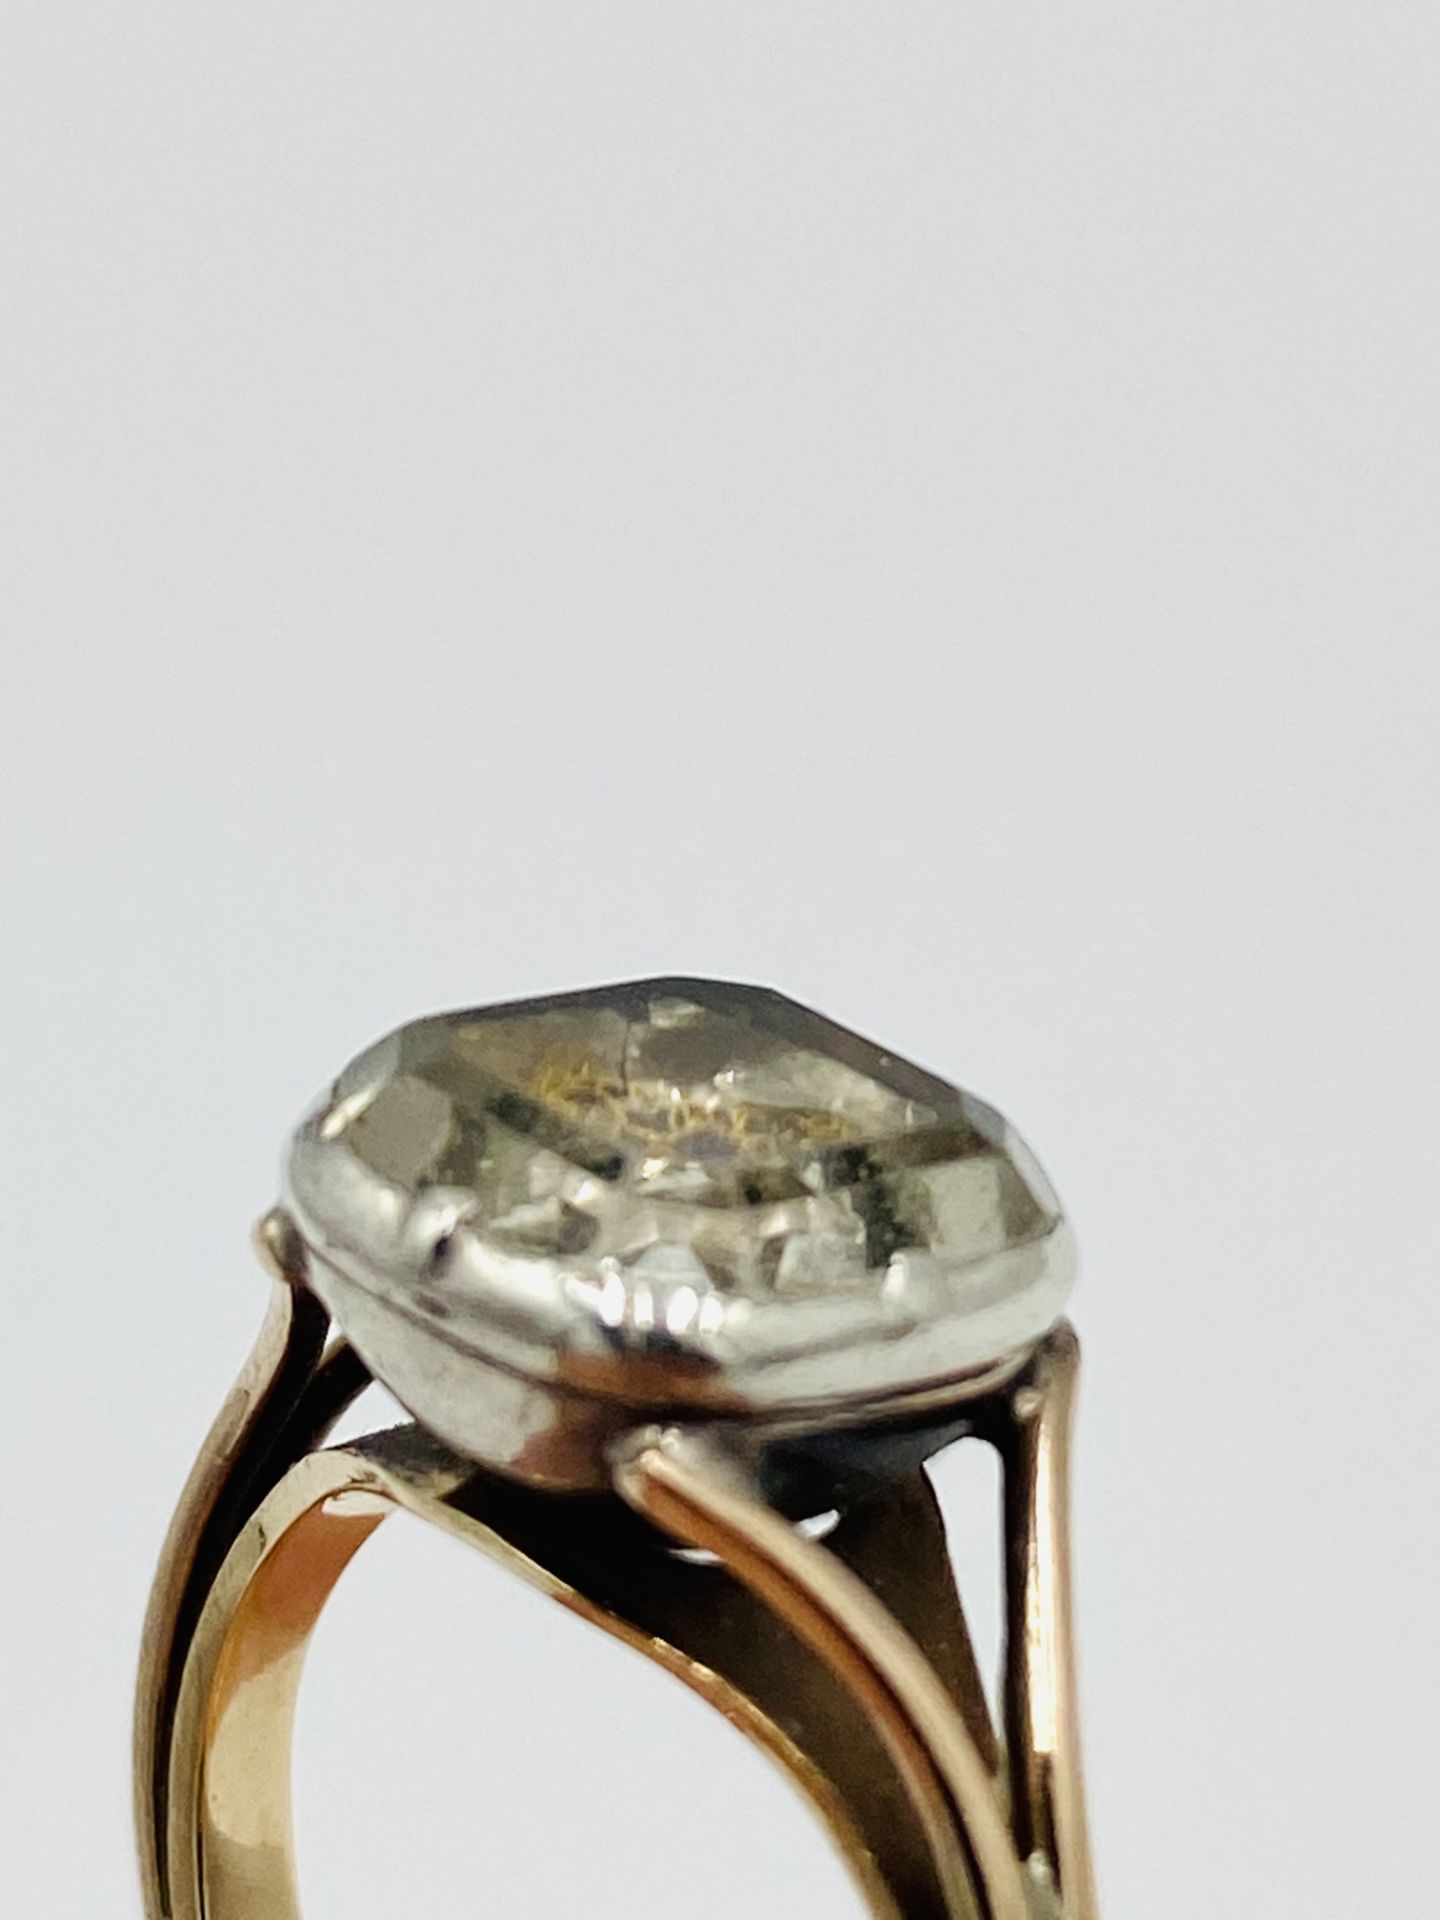 18th century gold ring - Image 5 of 6